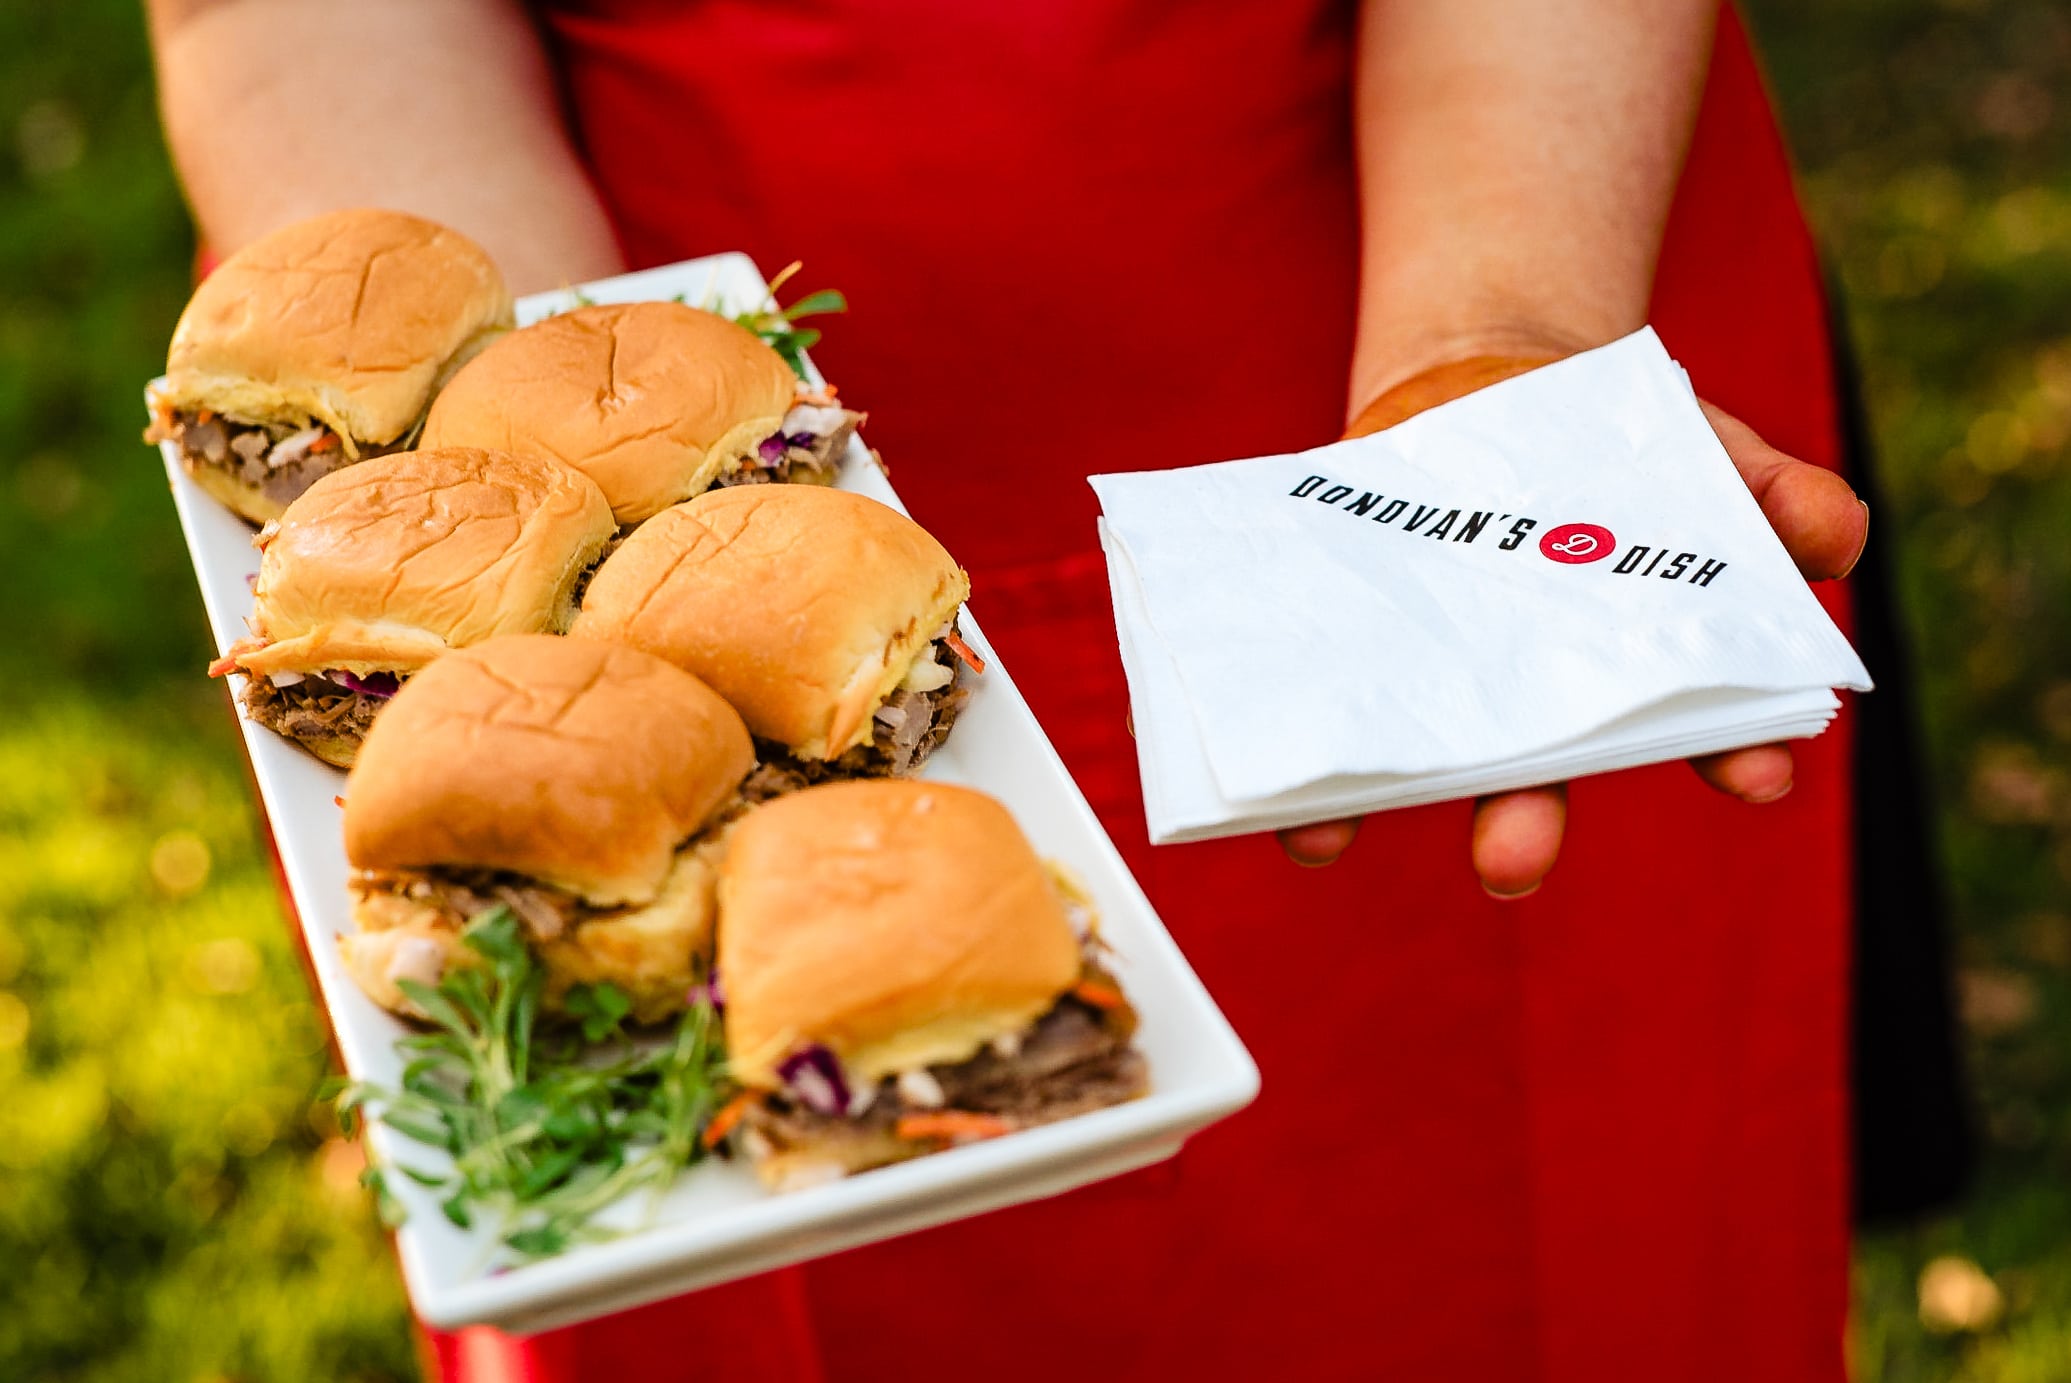 caterer's hands: one holding a tray of bbq sliders, the other holding a stack of cocktail napkins.